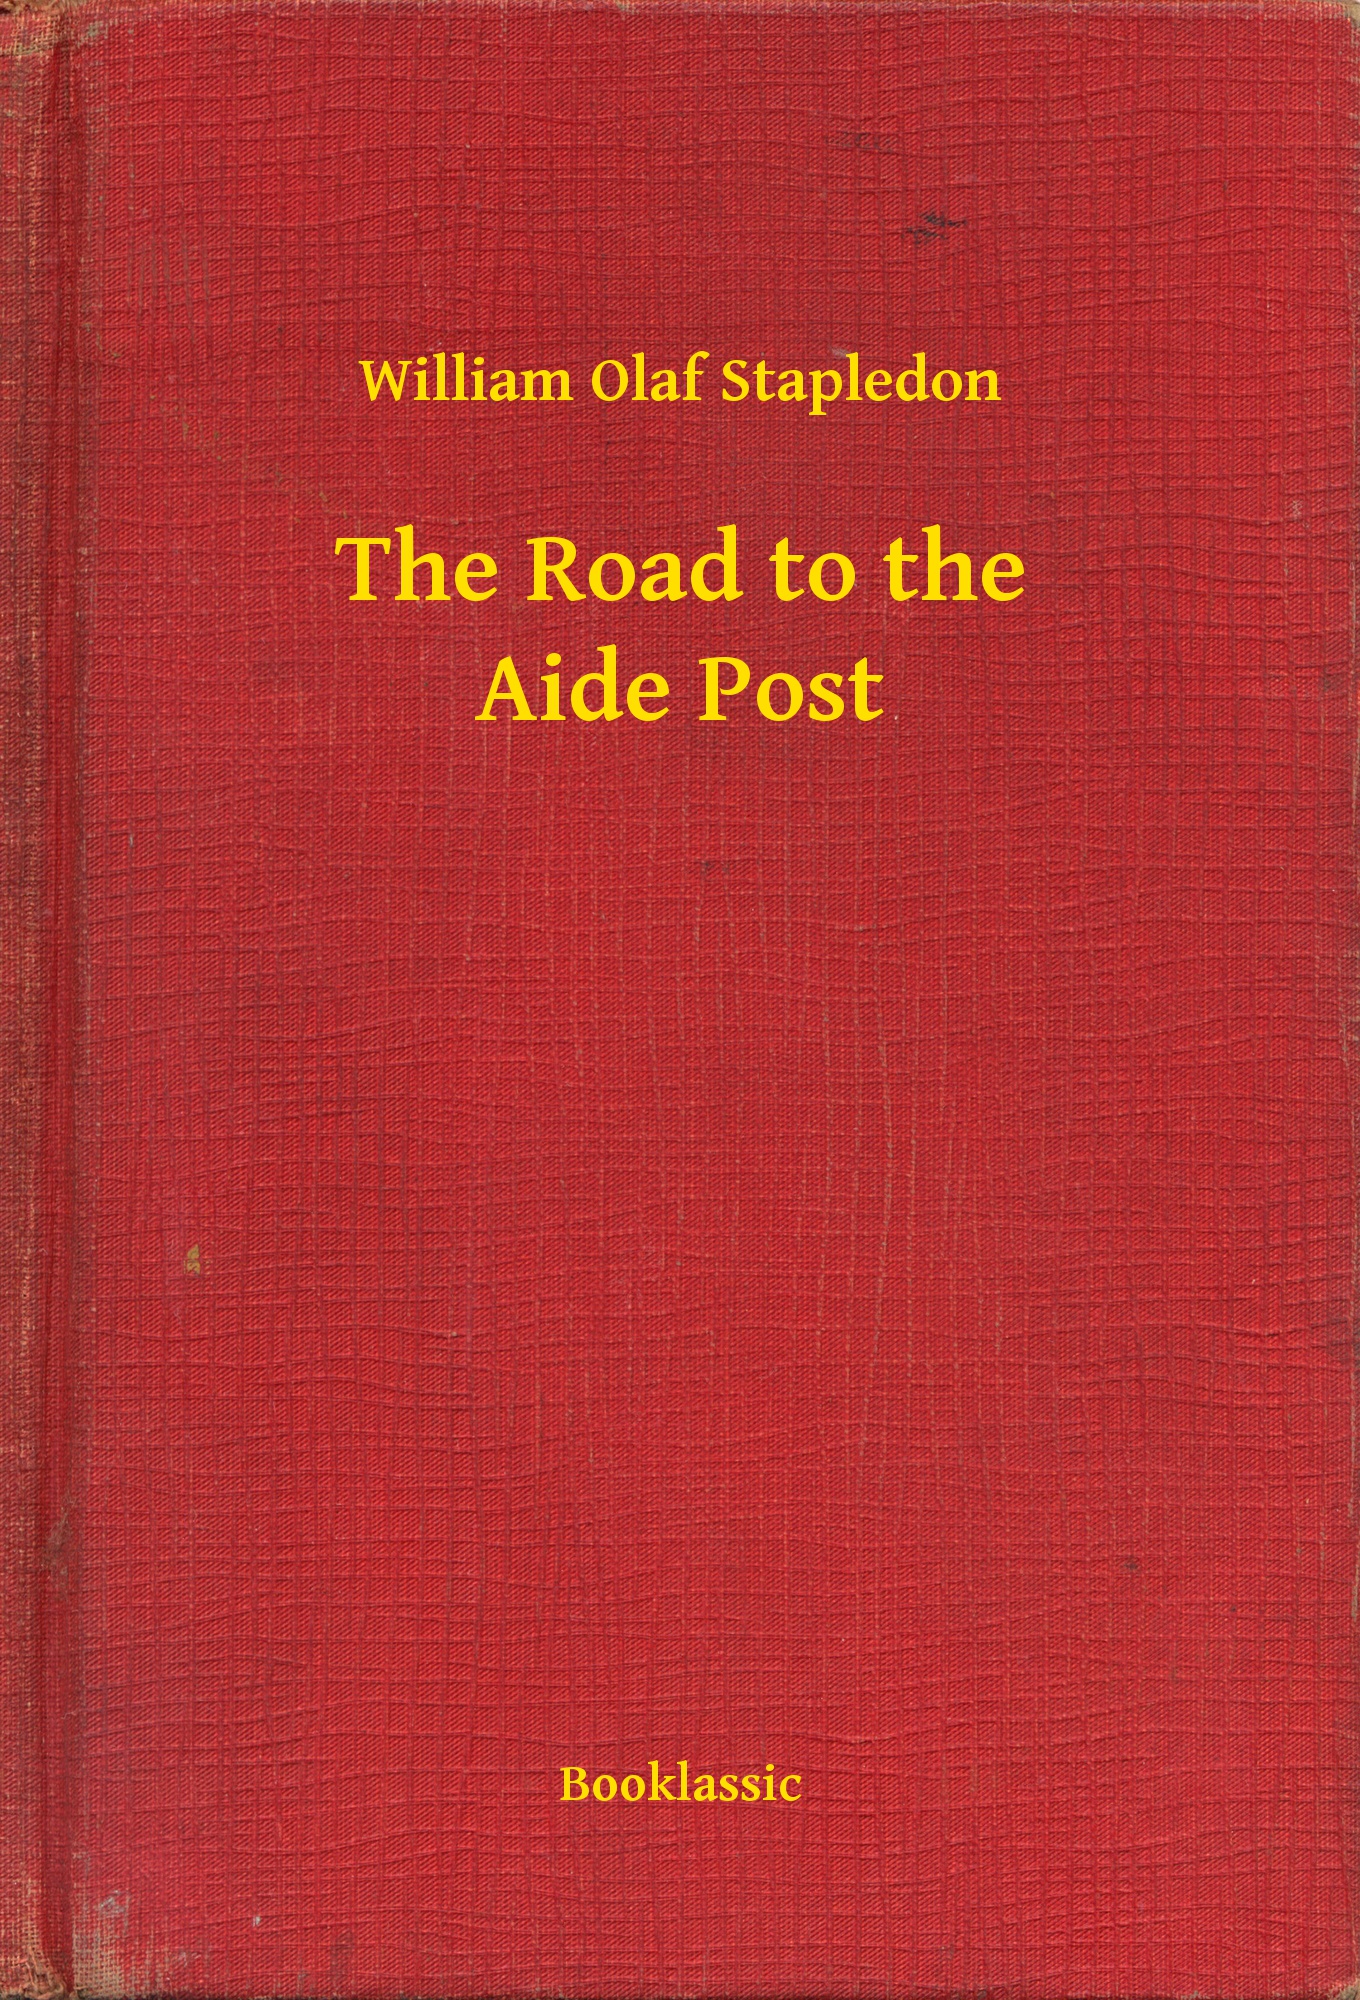 The Road to the Aide Post